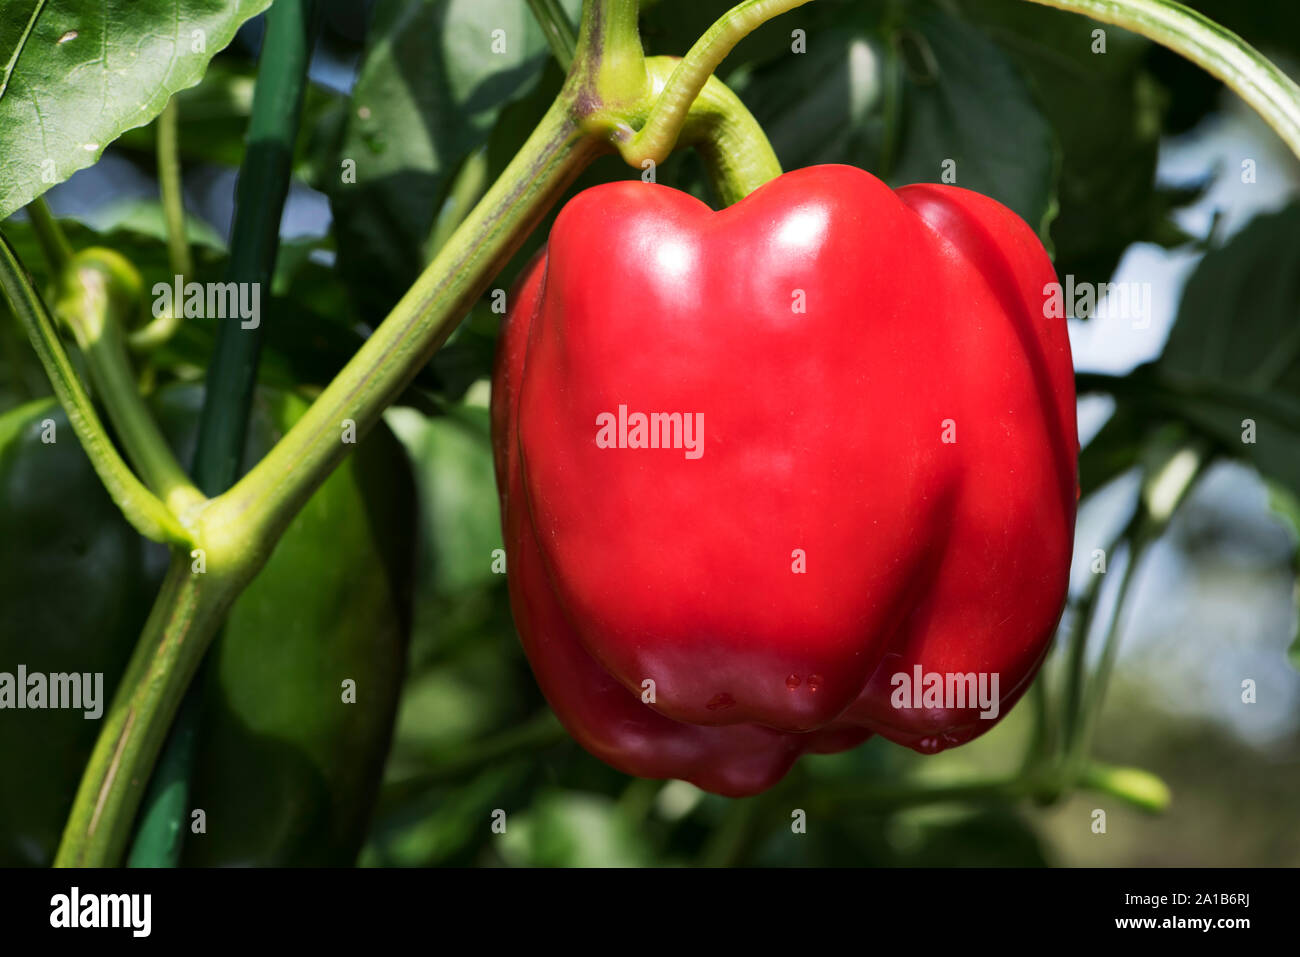 Closeup of an appetizing red bell pepper on a plant. Stock Photo